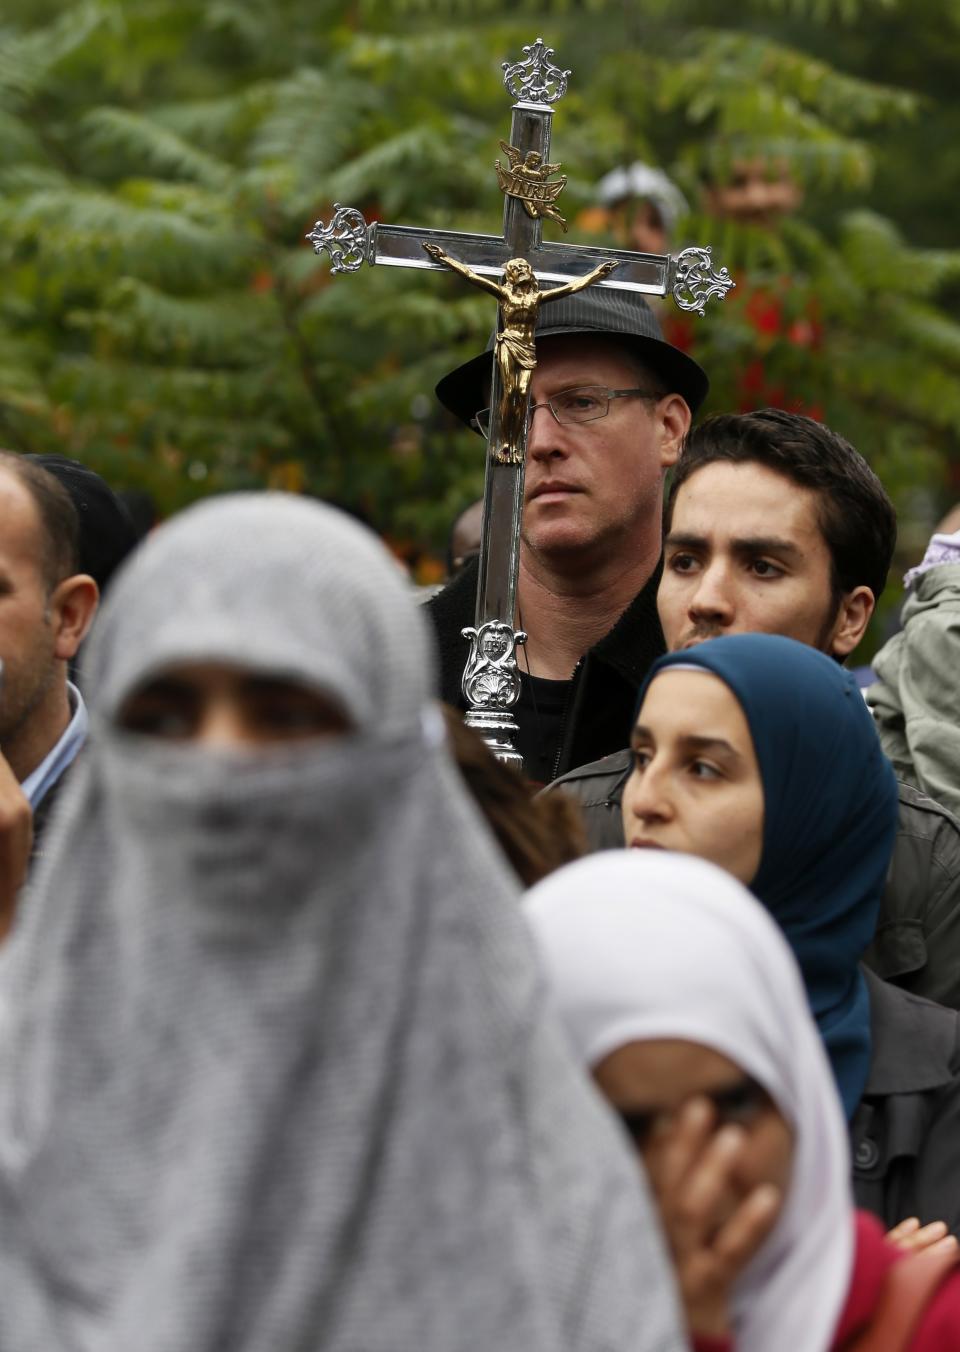 A man carries a cross during a protest against Quebec's proposed Charter of Values in Montreal